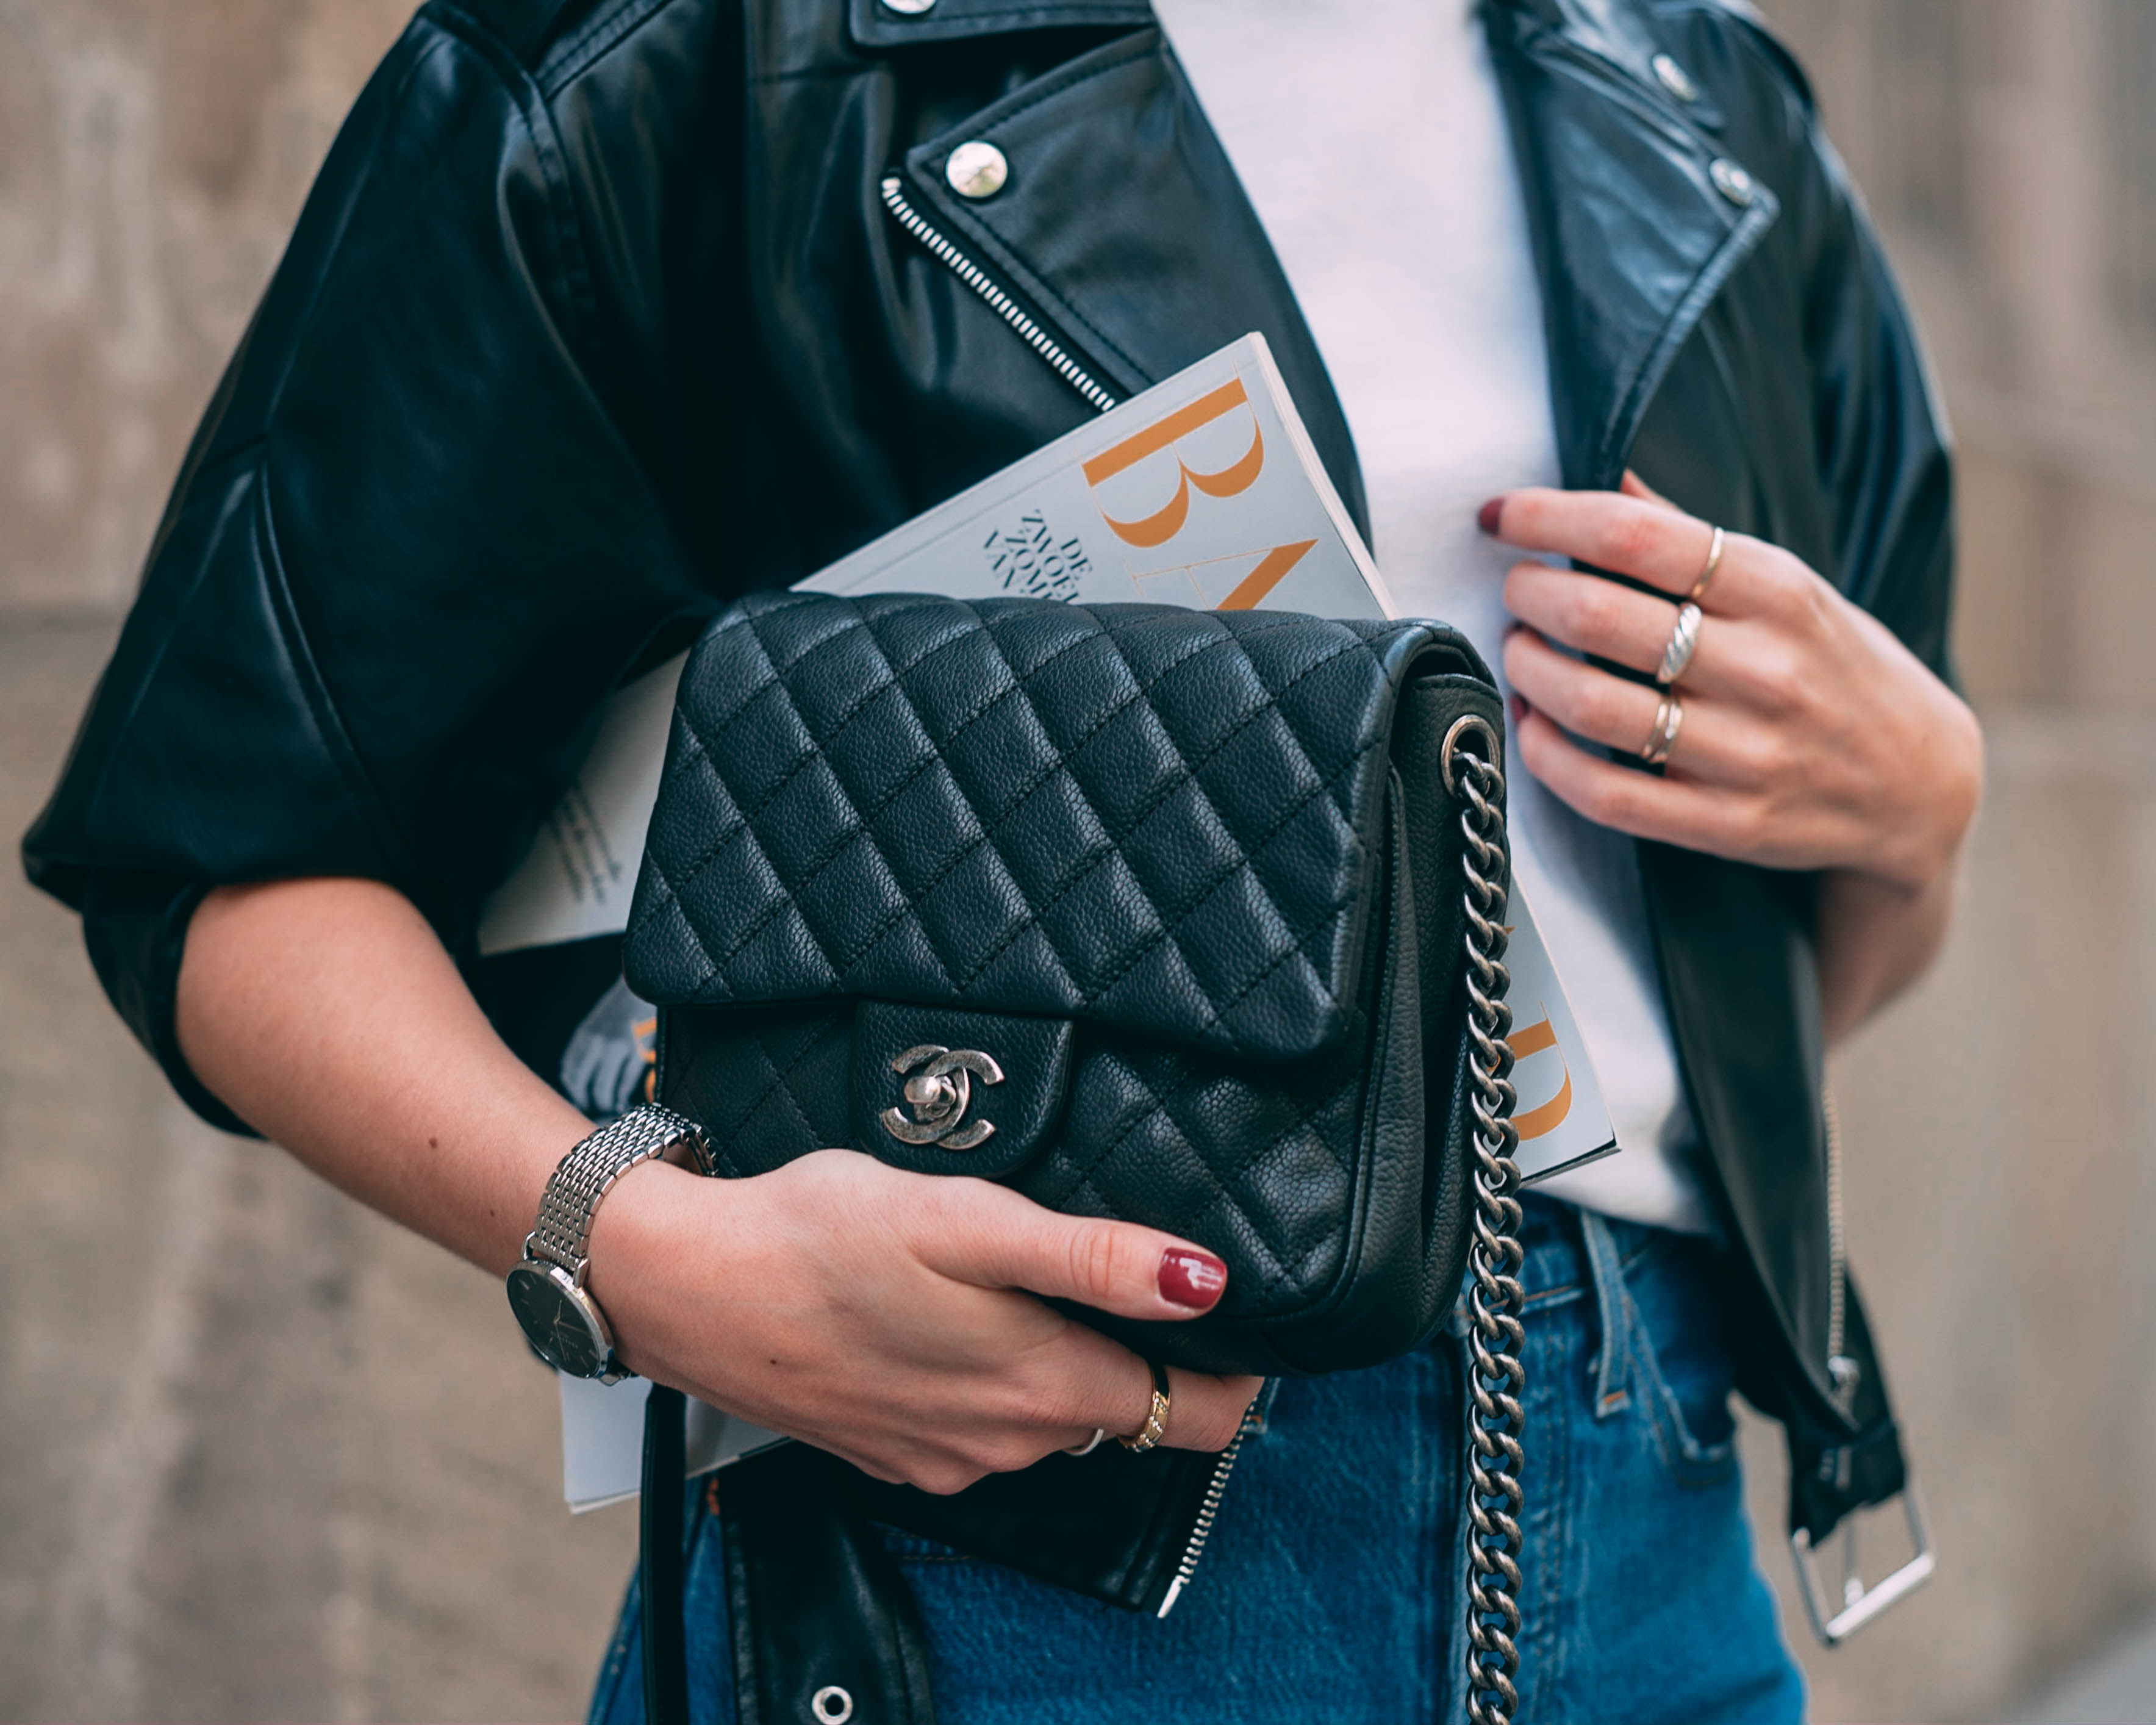 What do a Chanel bag and a content strategy have in common? – Lian Galliard